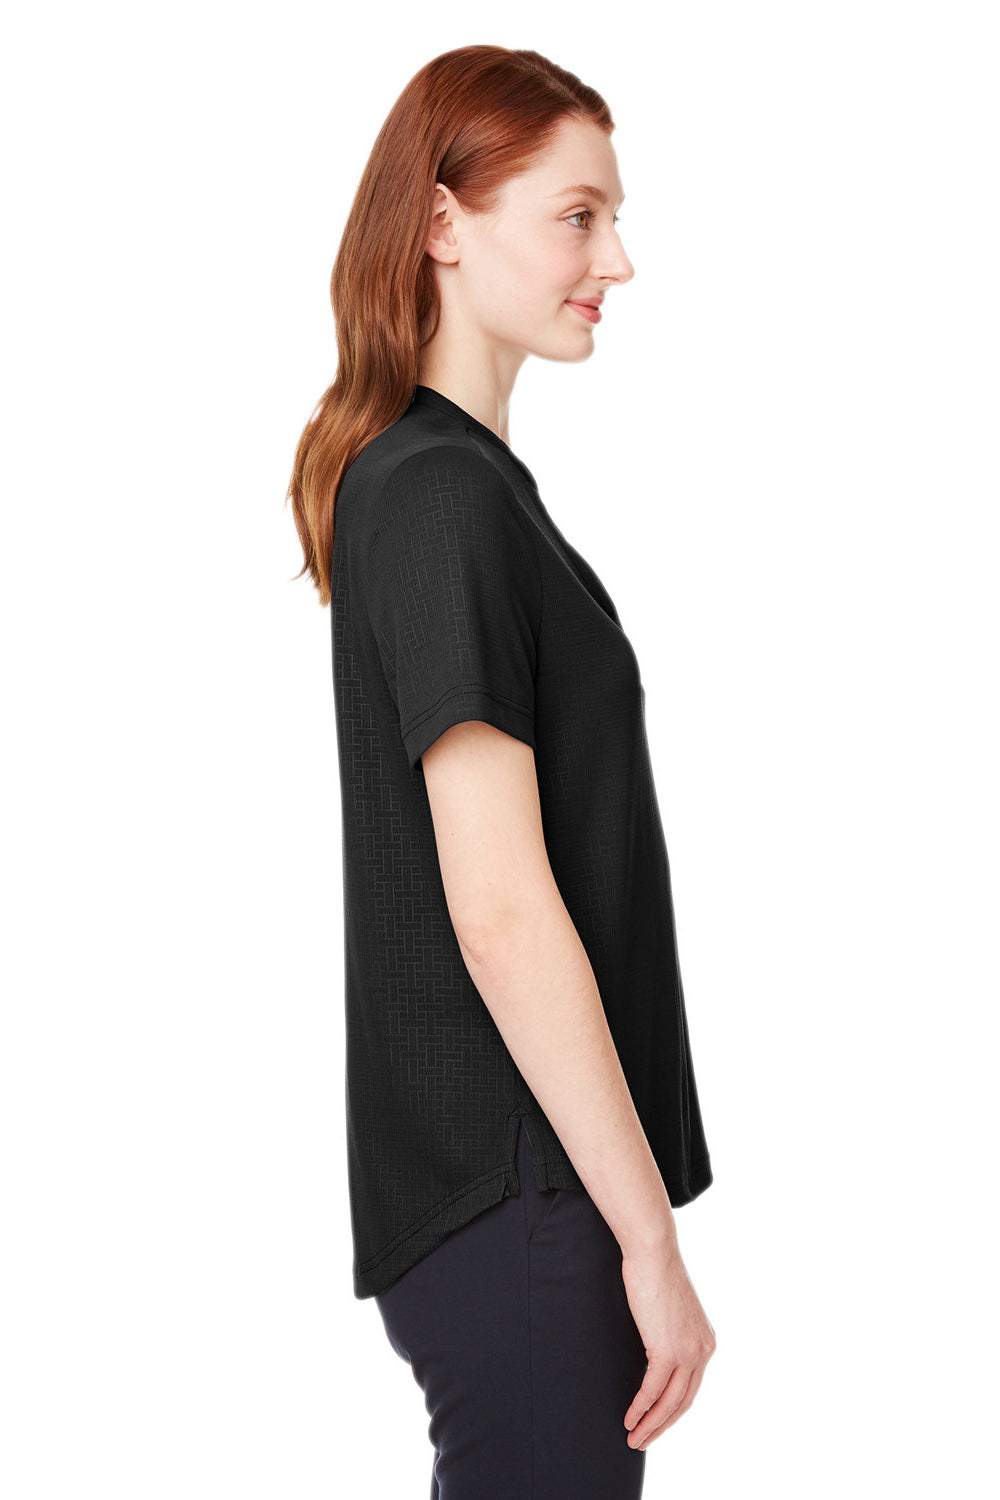 North End NE102W Womens Replay Recycled Short Sleeve Polo Shirt Black Side